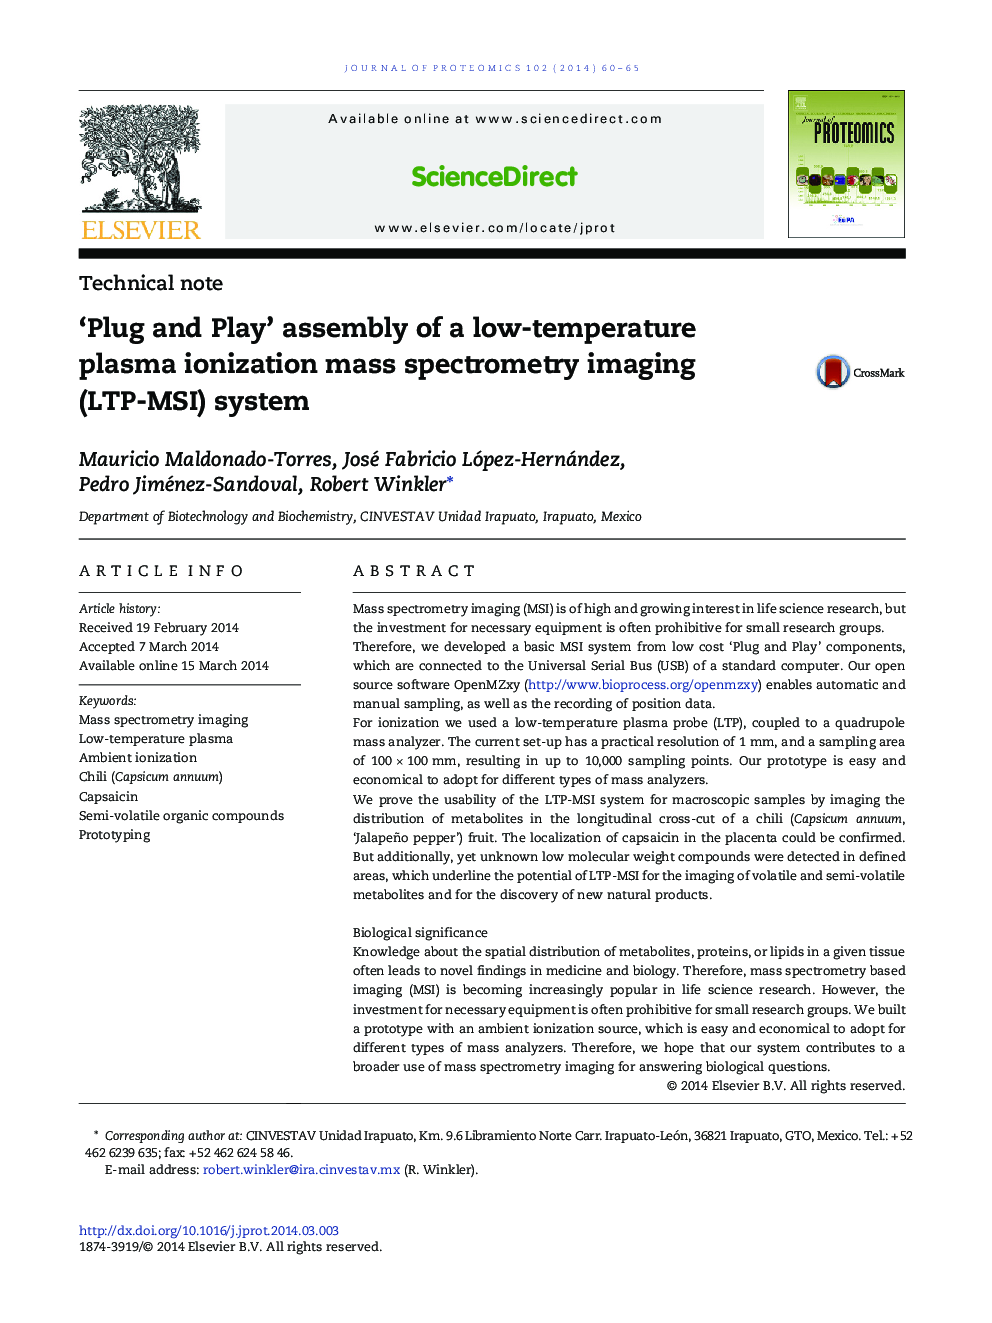 ‘Plug and Play’ assembly of a low-temperature plasma ionization mass spectrometry imaging (LTP-MSI) system